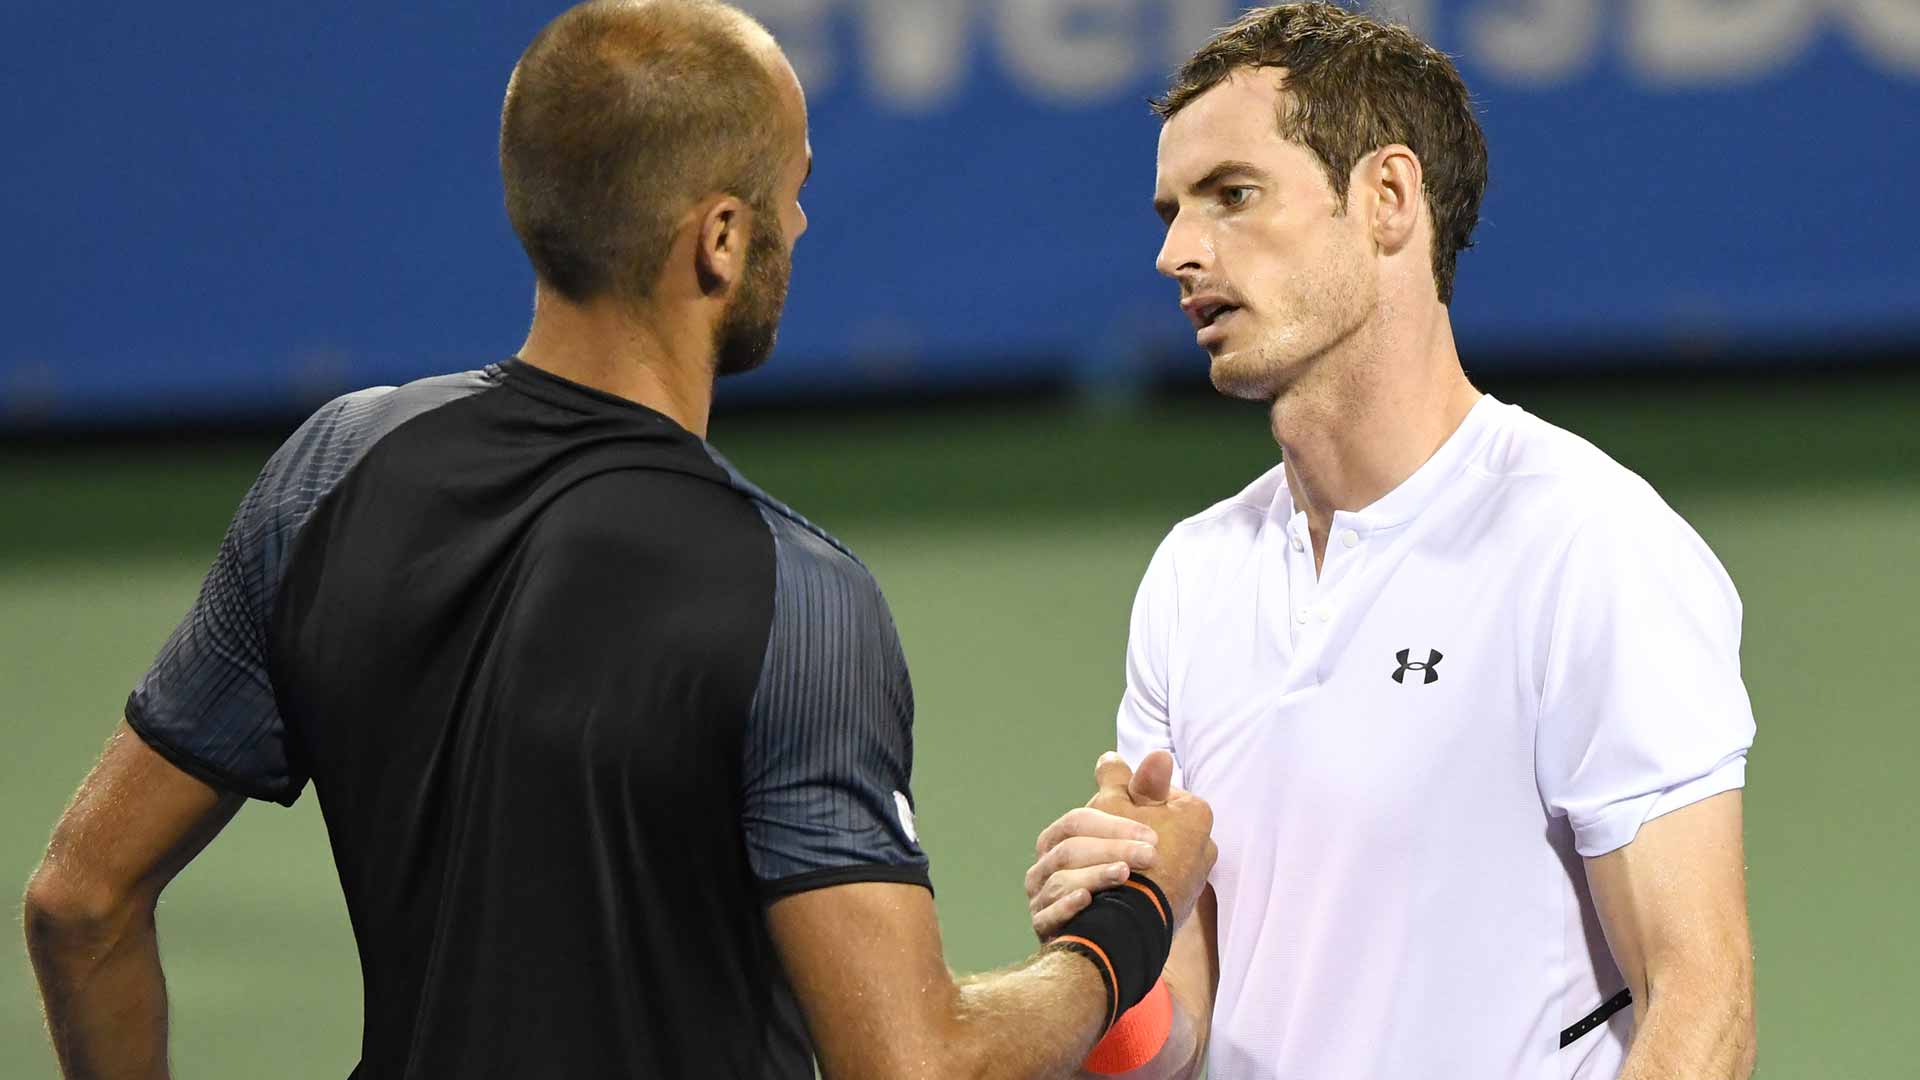 <a href='/en/players/marius-copil/ca99/overview'>Marius Copil</a>, <a href='/en/players/andy-murray/mc10/overview'>Andy Murray</a>“></p>
<p>A couple hours later, Murray laid in his hotel bed and recorded a video message on his phone at 5:09 a.m., as seen in the documentary ‘<a href=